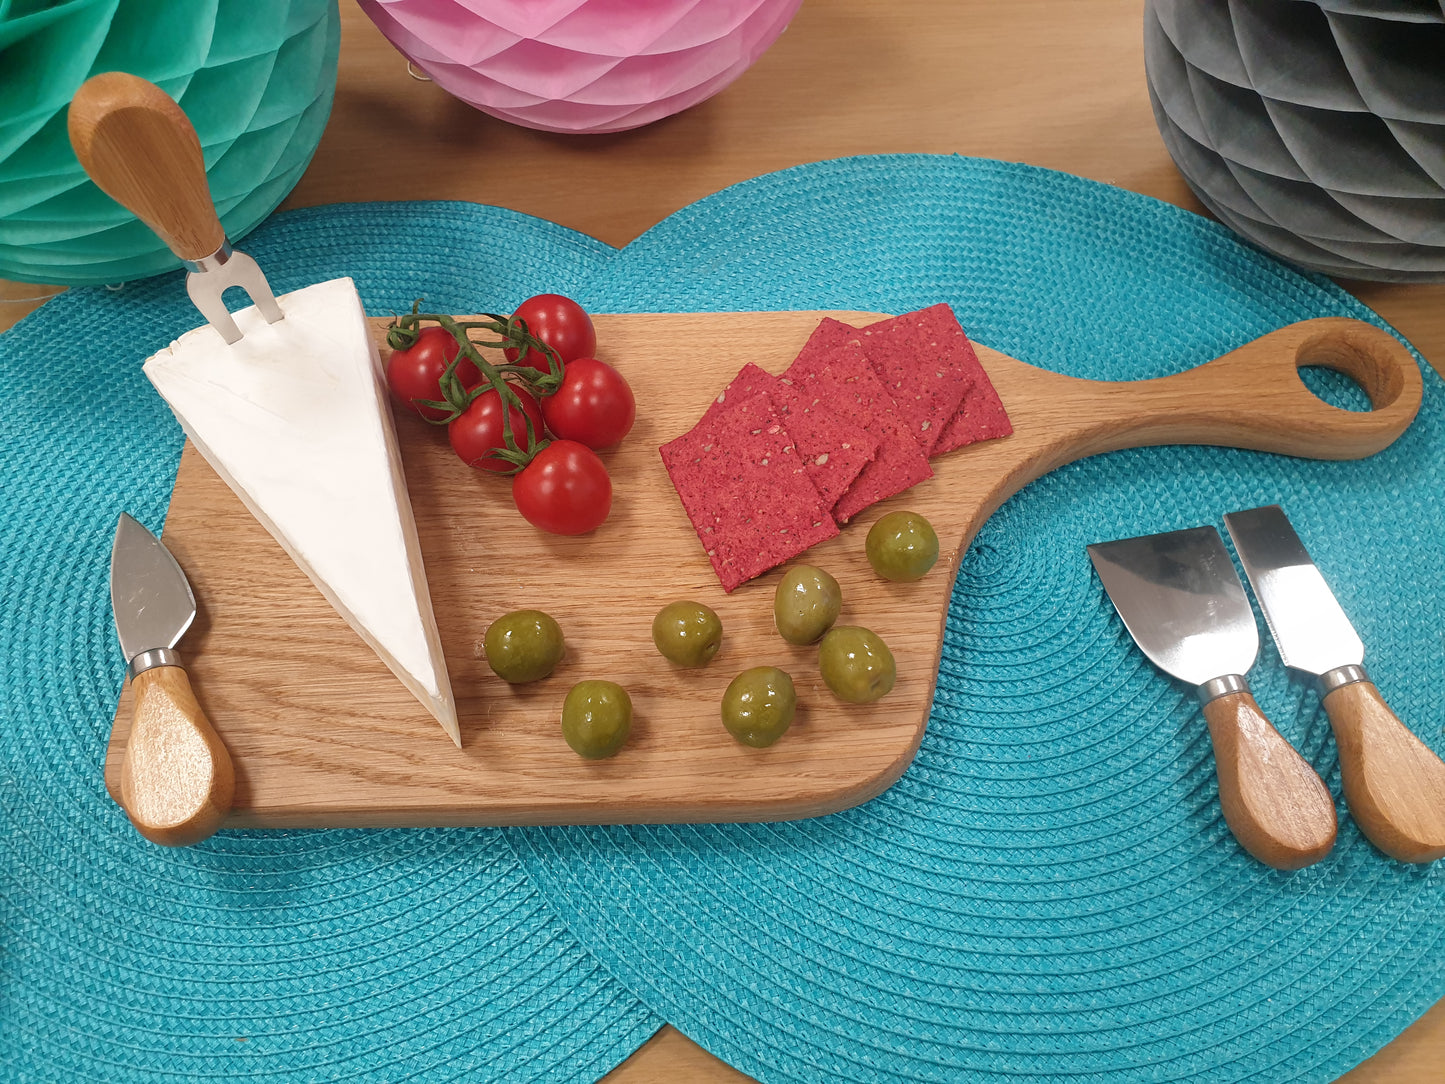 Paddle Serving/Chopping Board